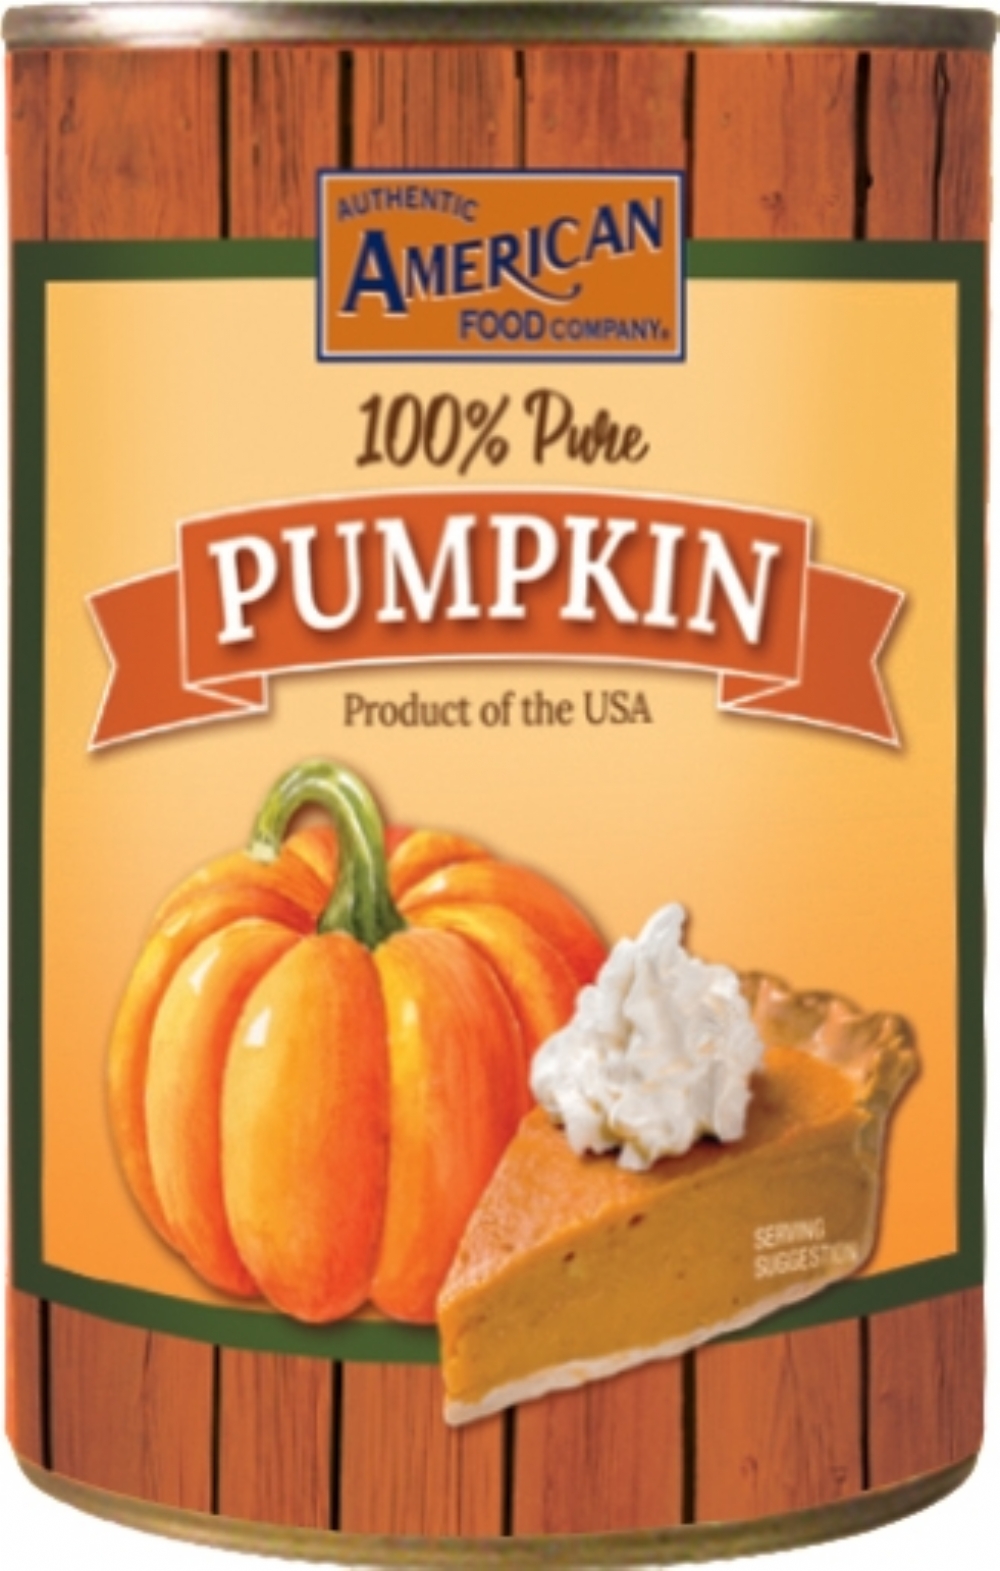 AUTHENTIC AMERICAN FOOD CO. 100% Pure Pumpkin 425g